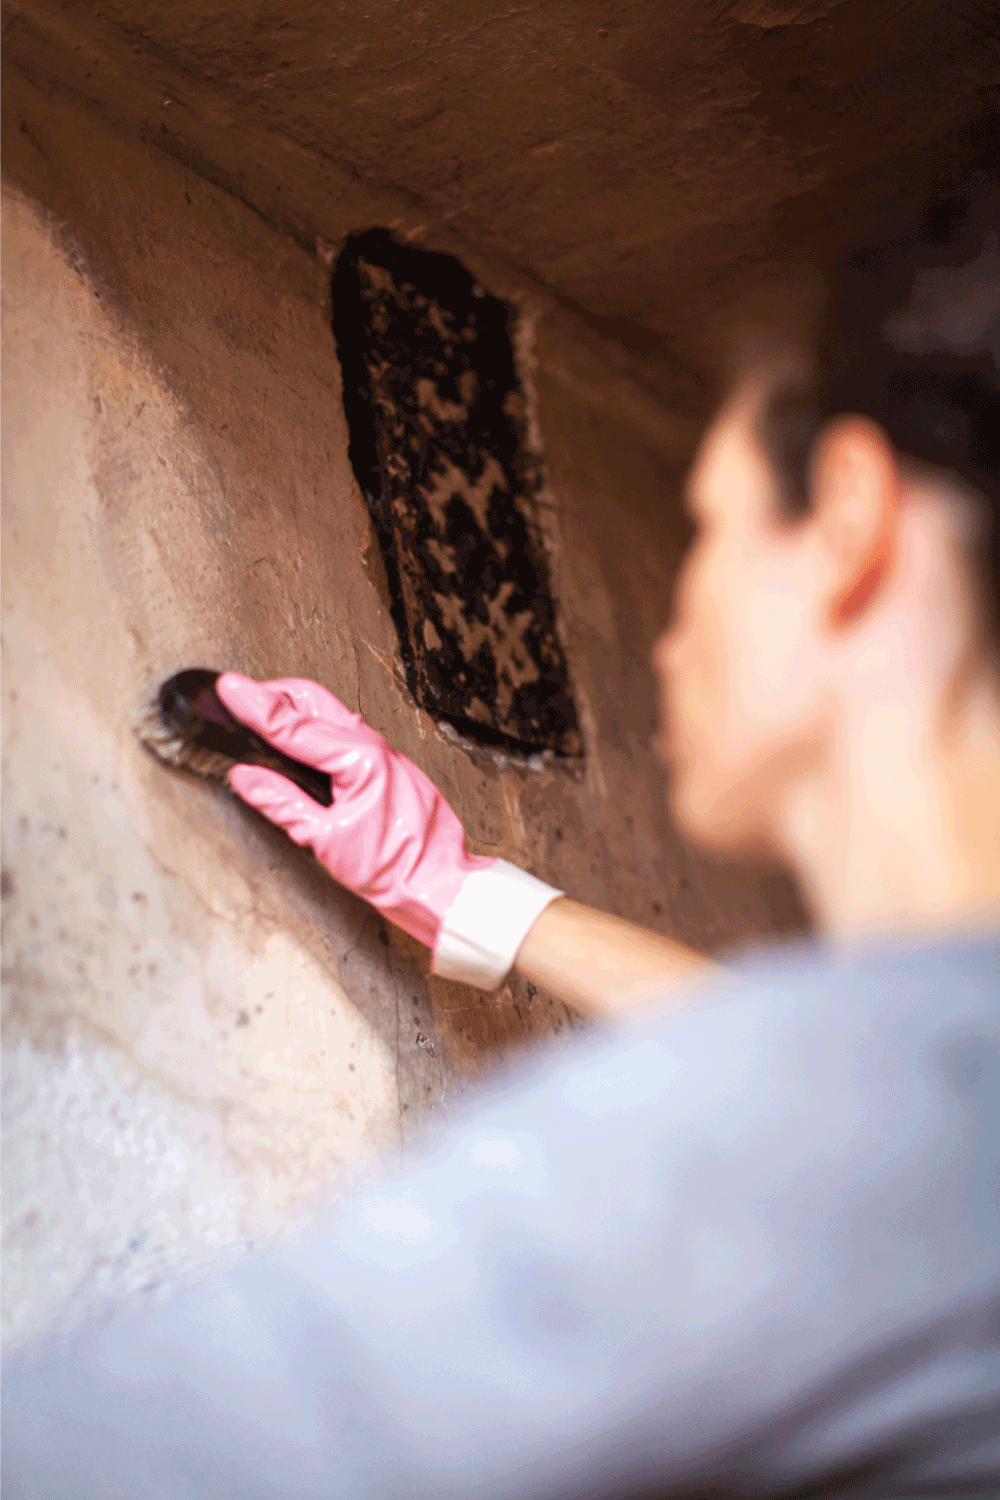 Adult Woman Cleaning and Renovating Wall in an Old Kitchen.